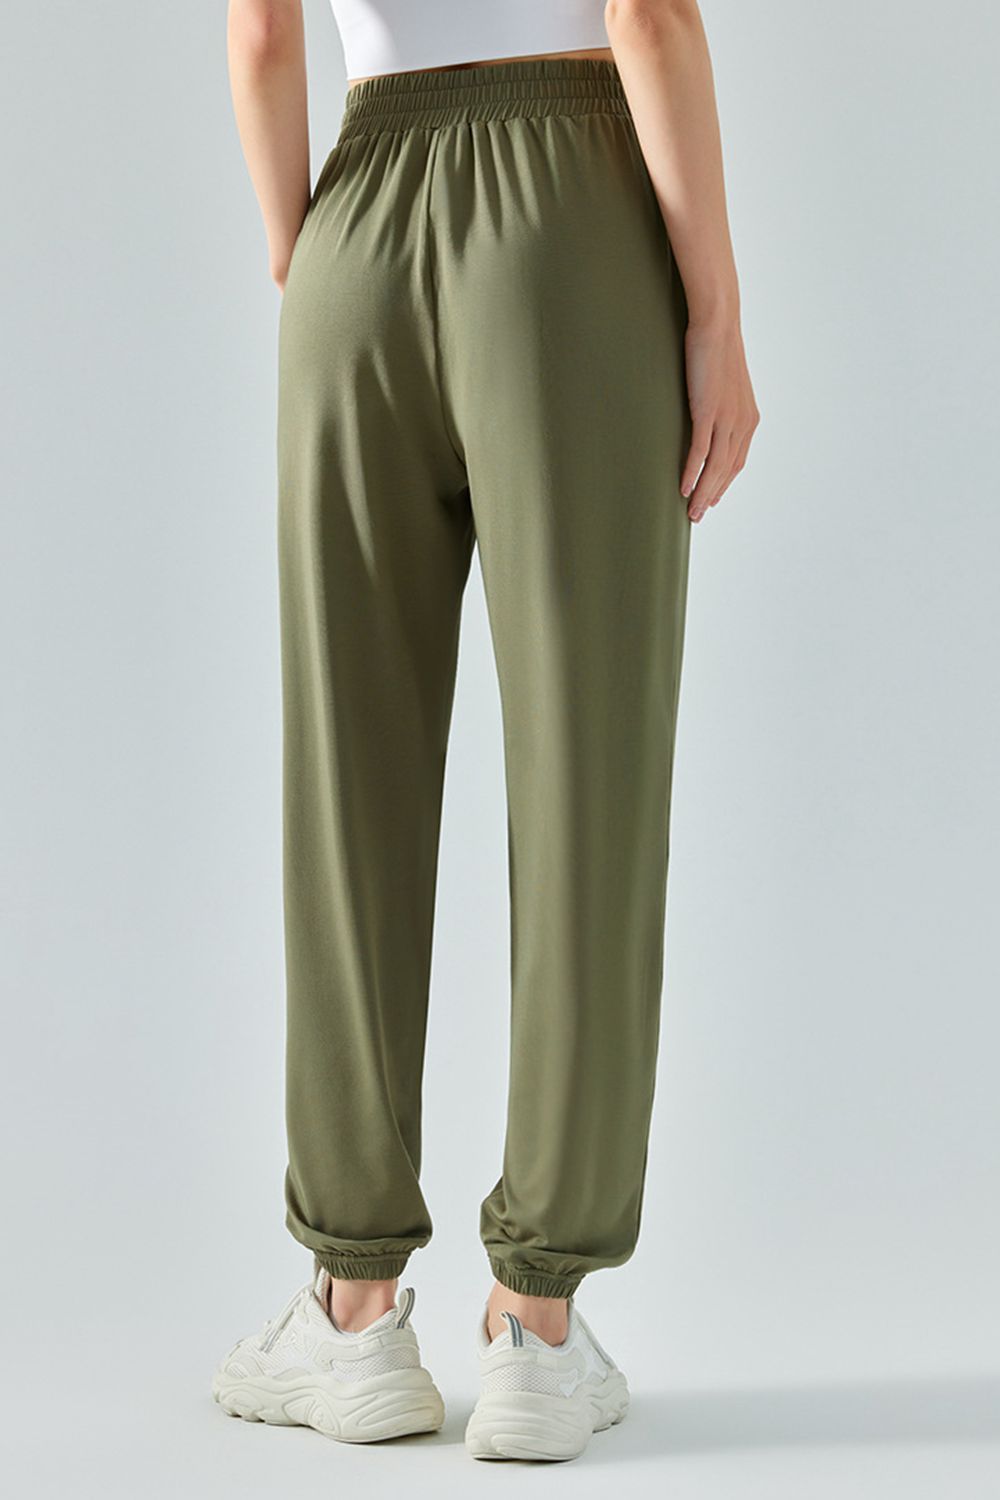 Tie Waist Sports Pants Print on any thing USA/STOD clothes